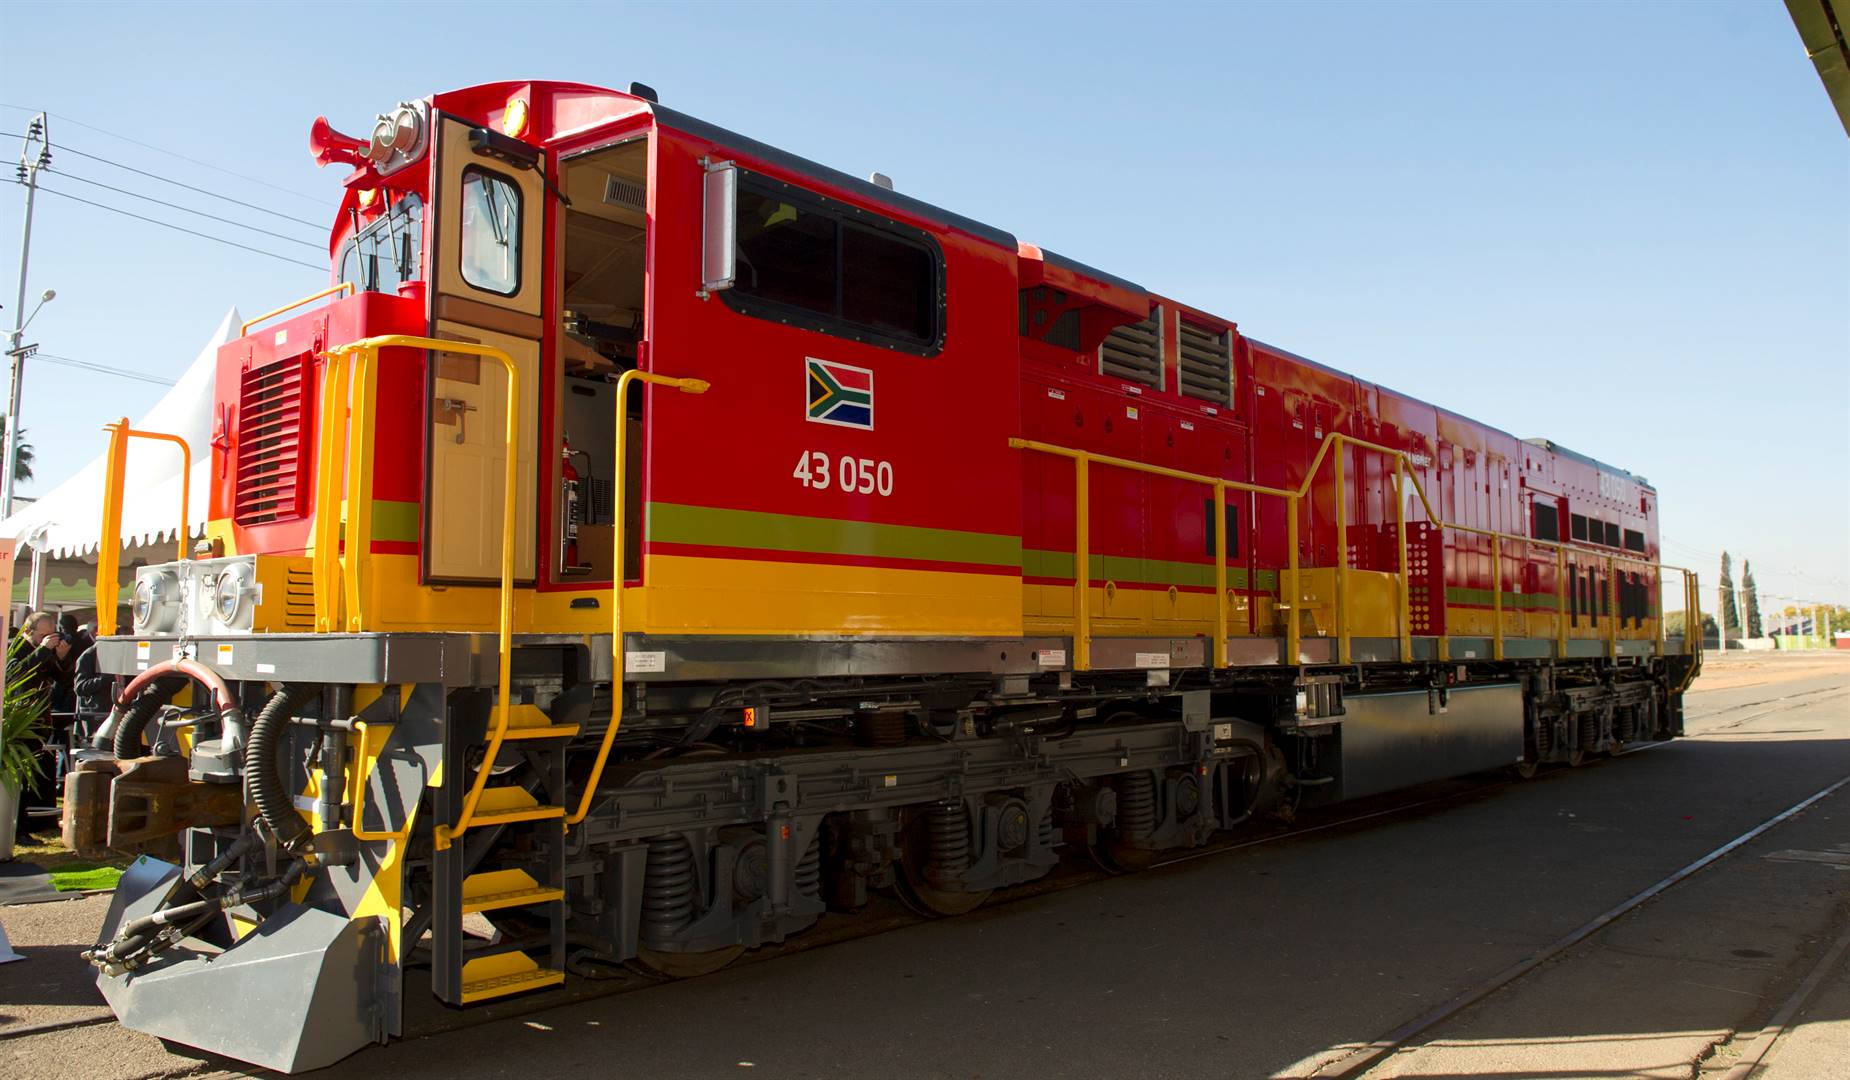 Transnet is taking CRRC to court to force it to release spares.